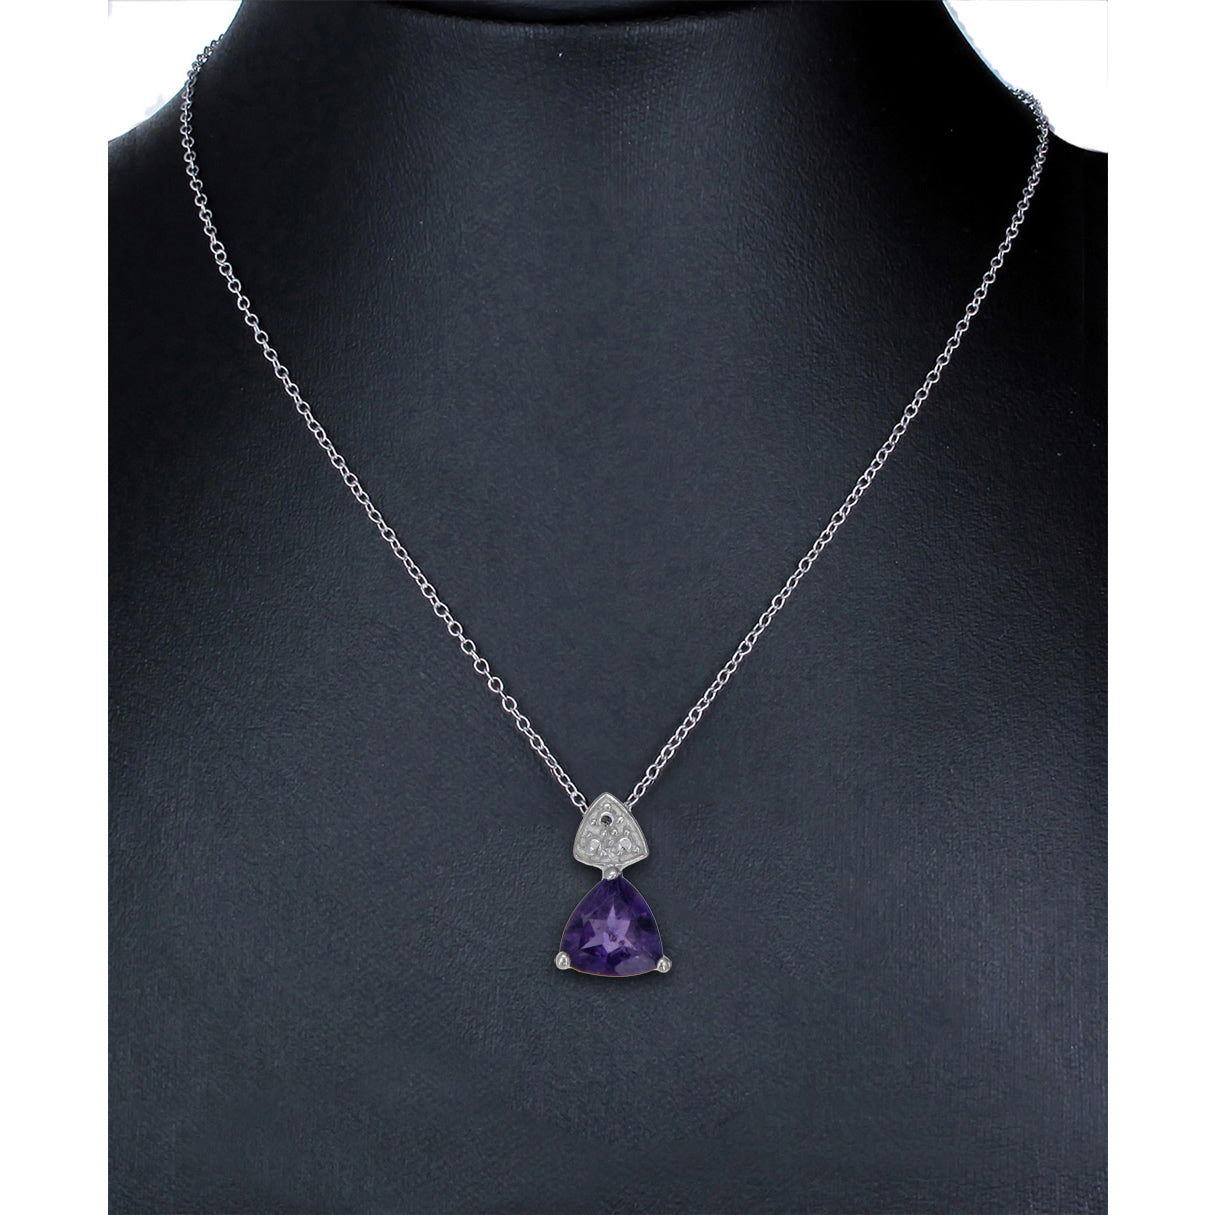 0.60 cttw Pendant Necklace, Purple Amethyst Trillion Shape Pendant Necklace for Women in .925 Sterling Silver with Rhodium, 18 Inch Chain, Prong Setting